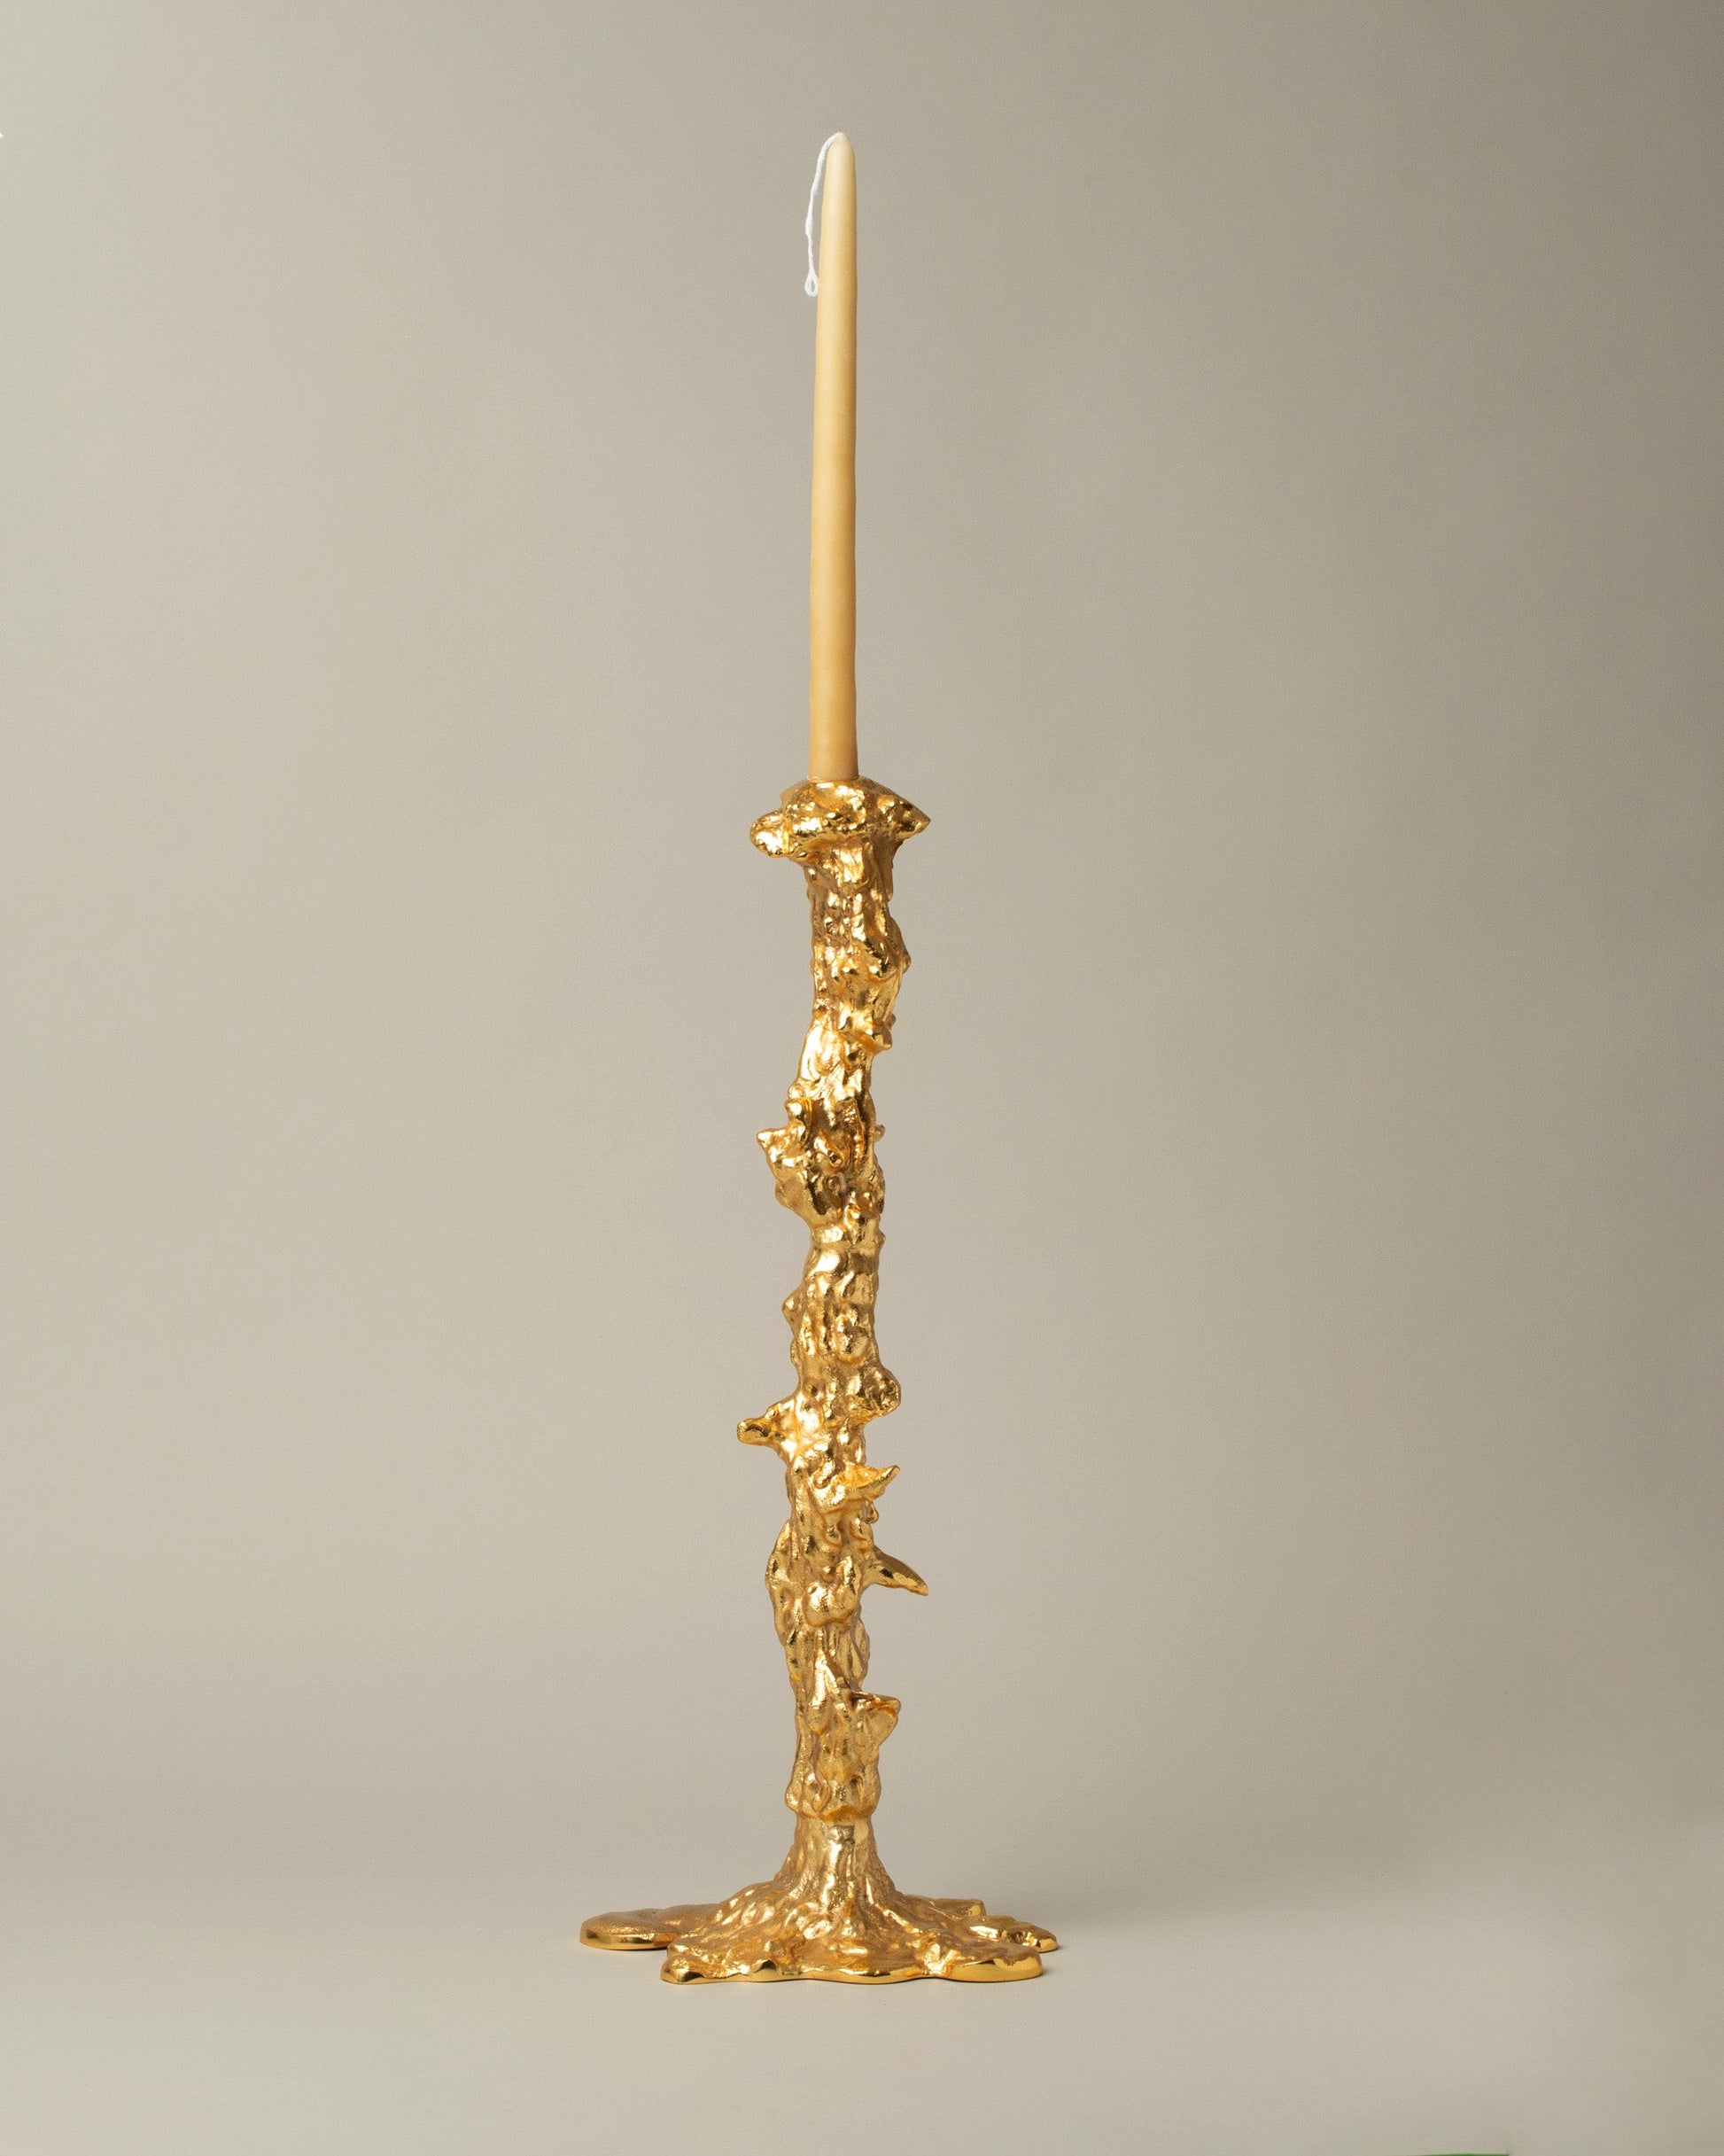 POLSPOTTEN Gold Large Drip Candle Holder on light color background.